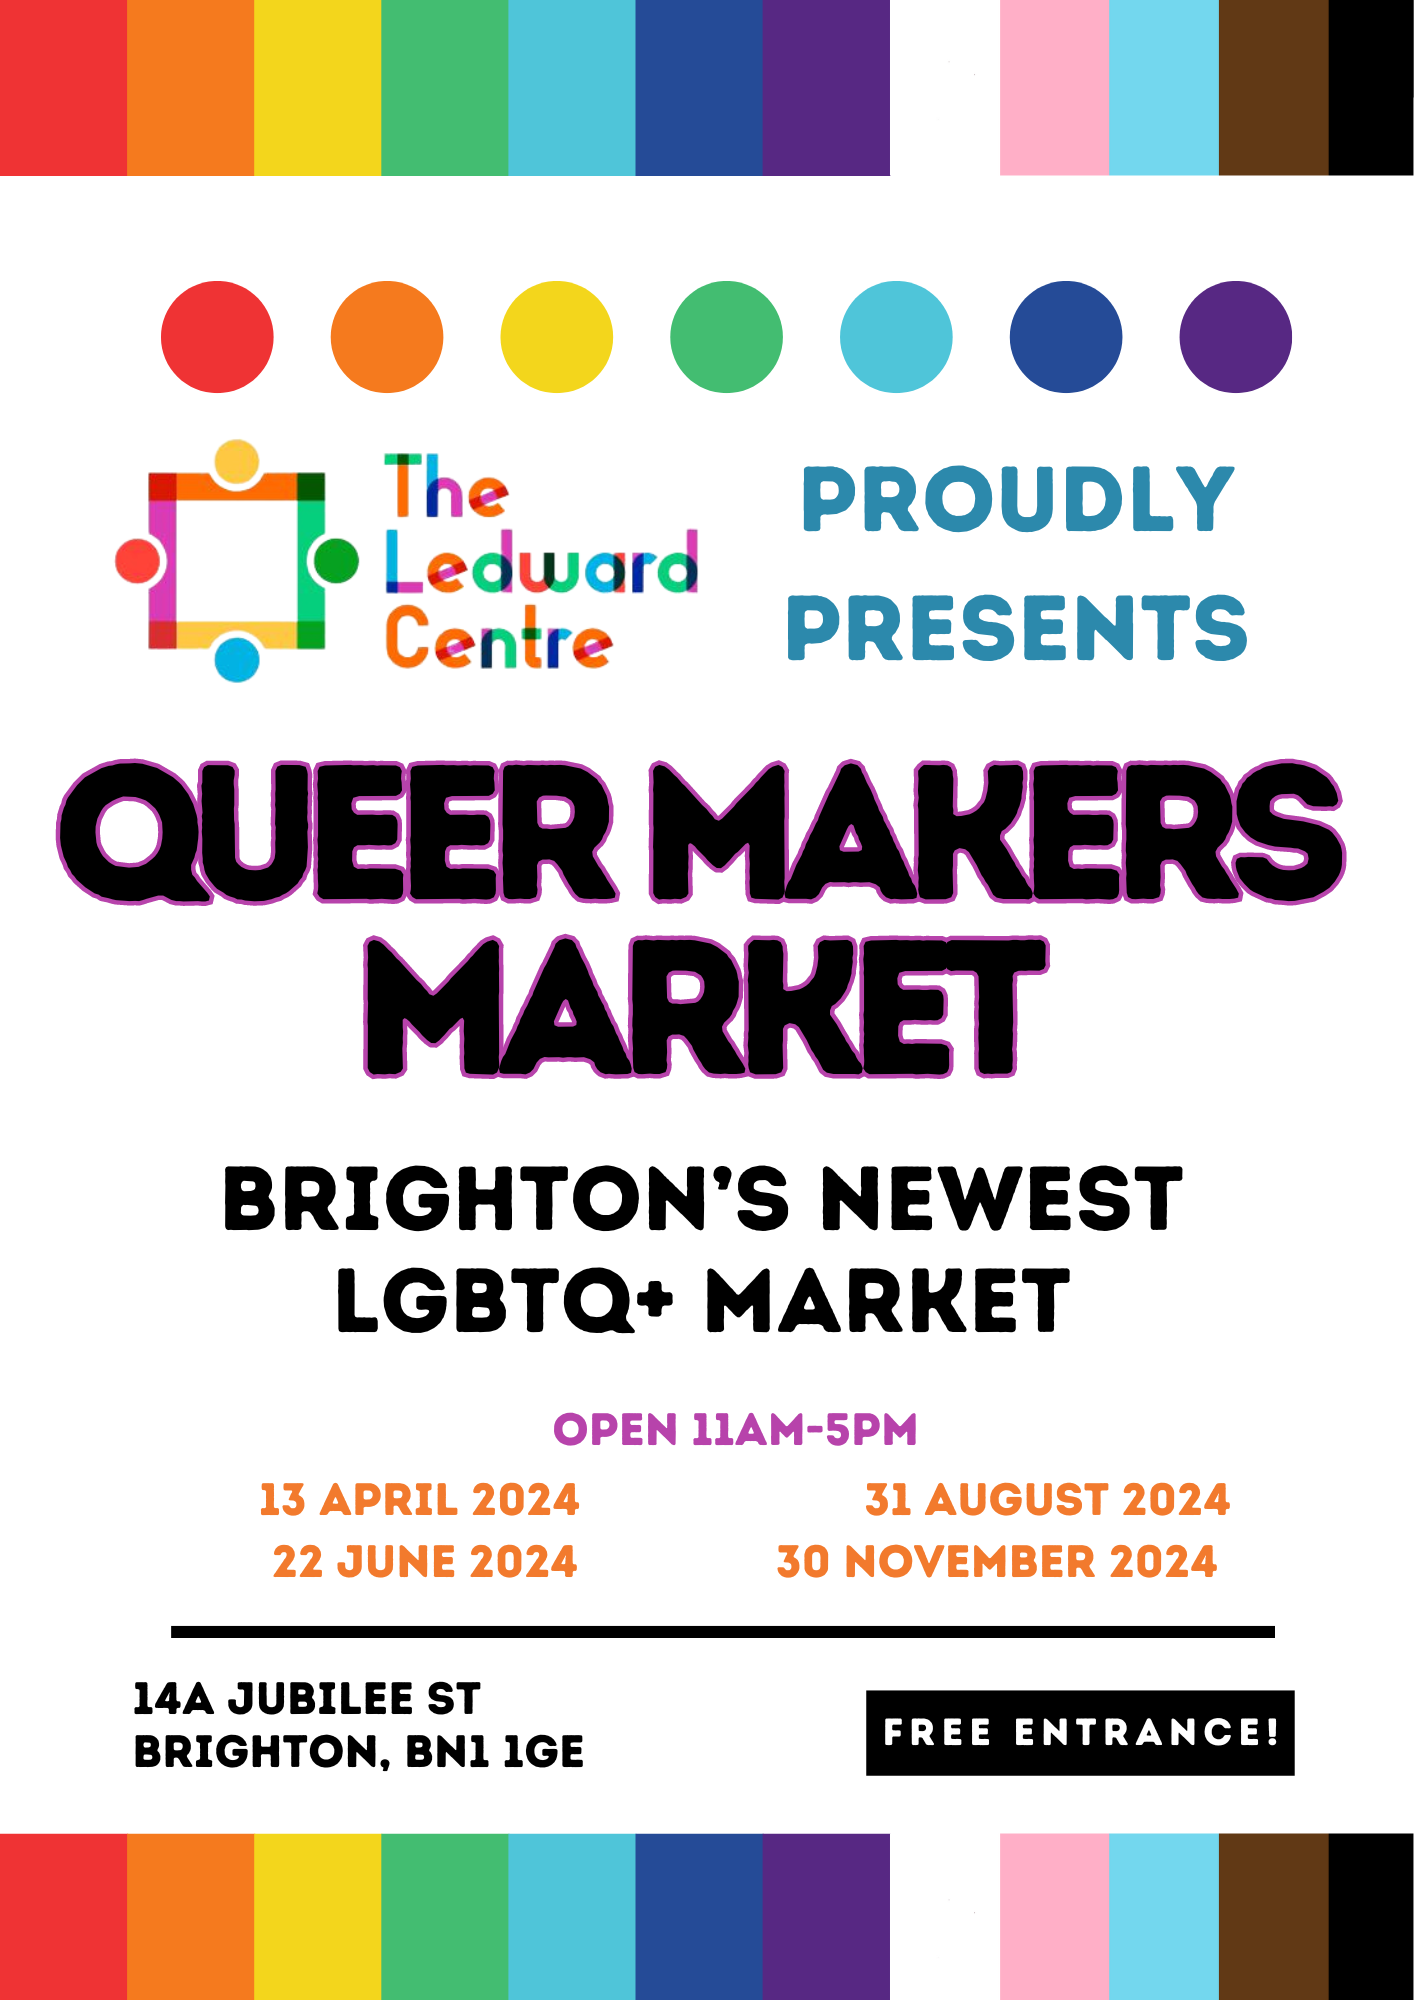 The Ledward Centre Welcomes the newest Queer Makers Market